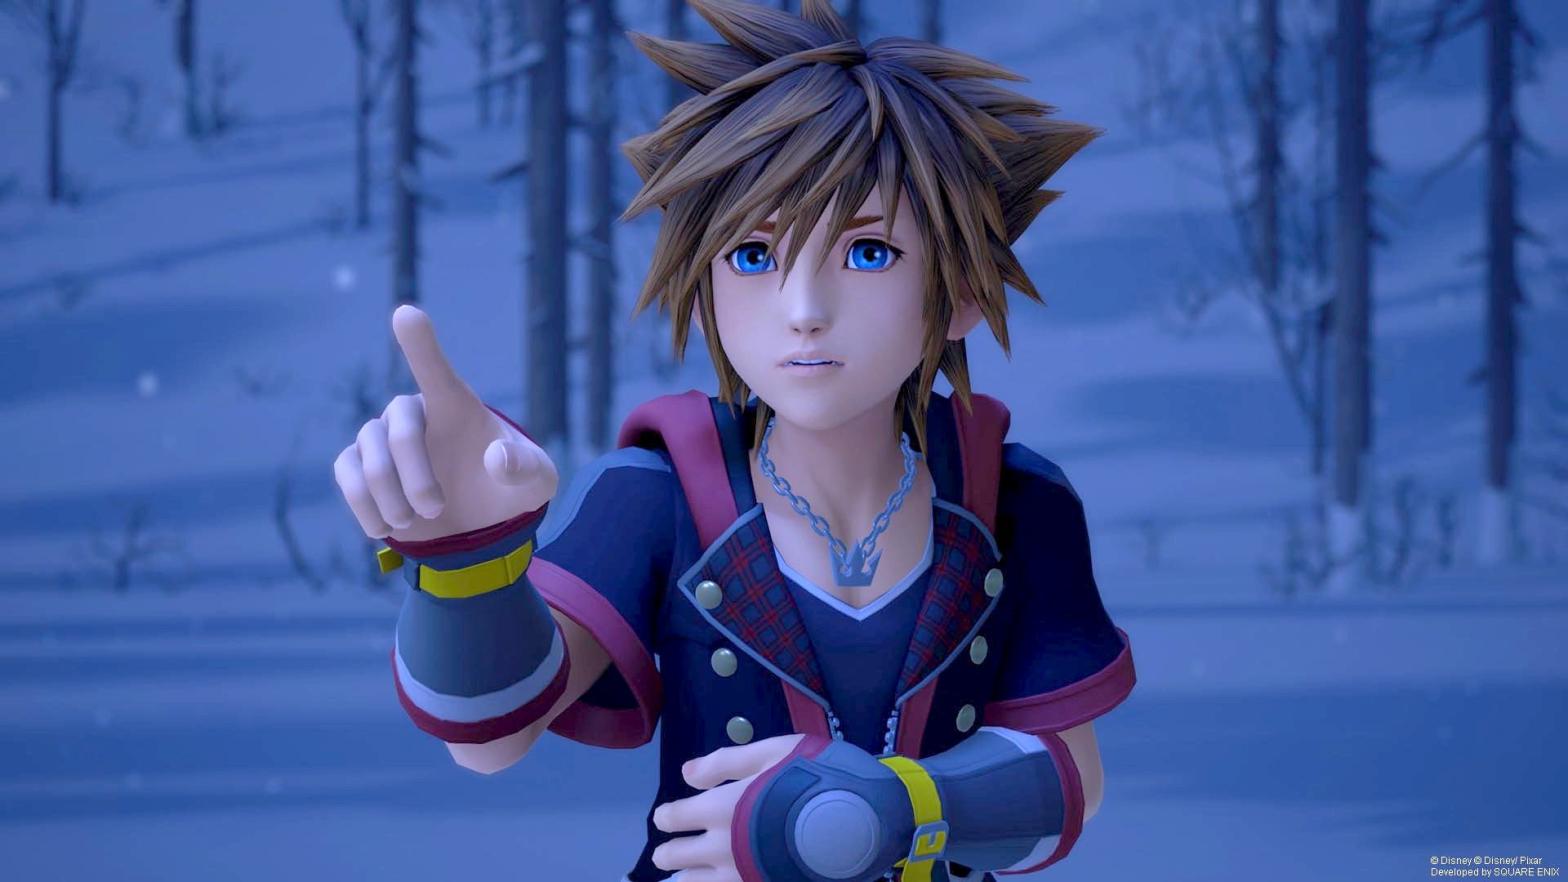 Are you pointing at the Smash invitation you shouldn't get, Sora? (Image: Square Enix)